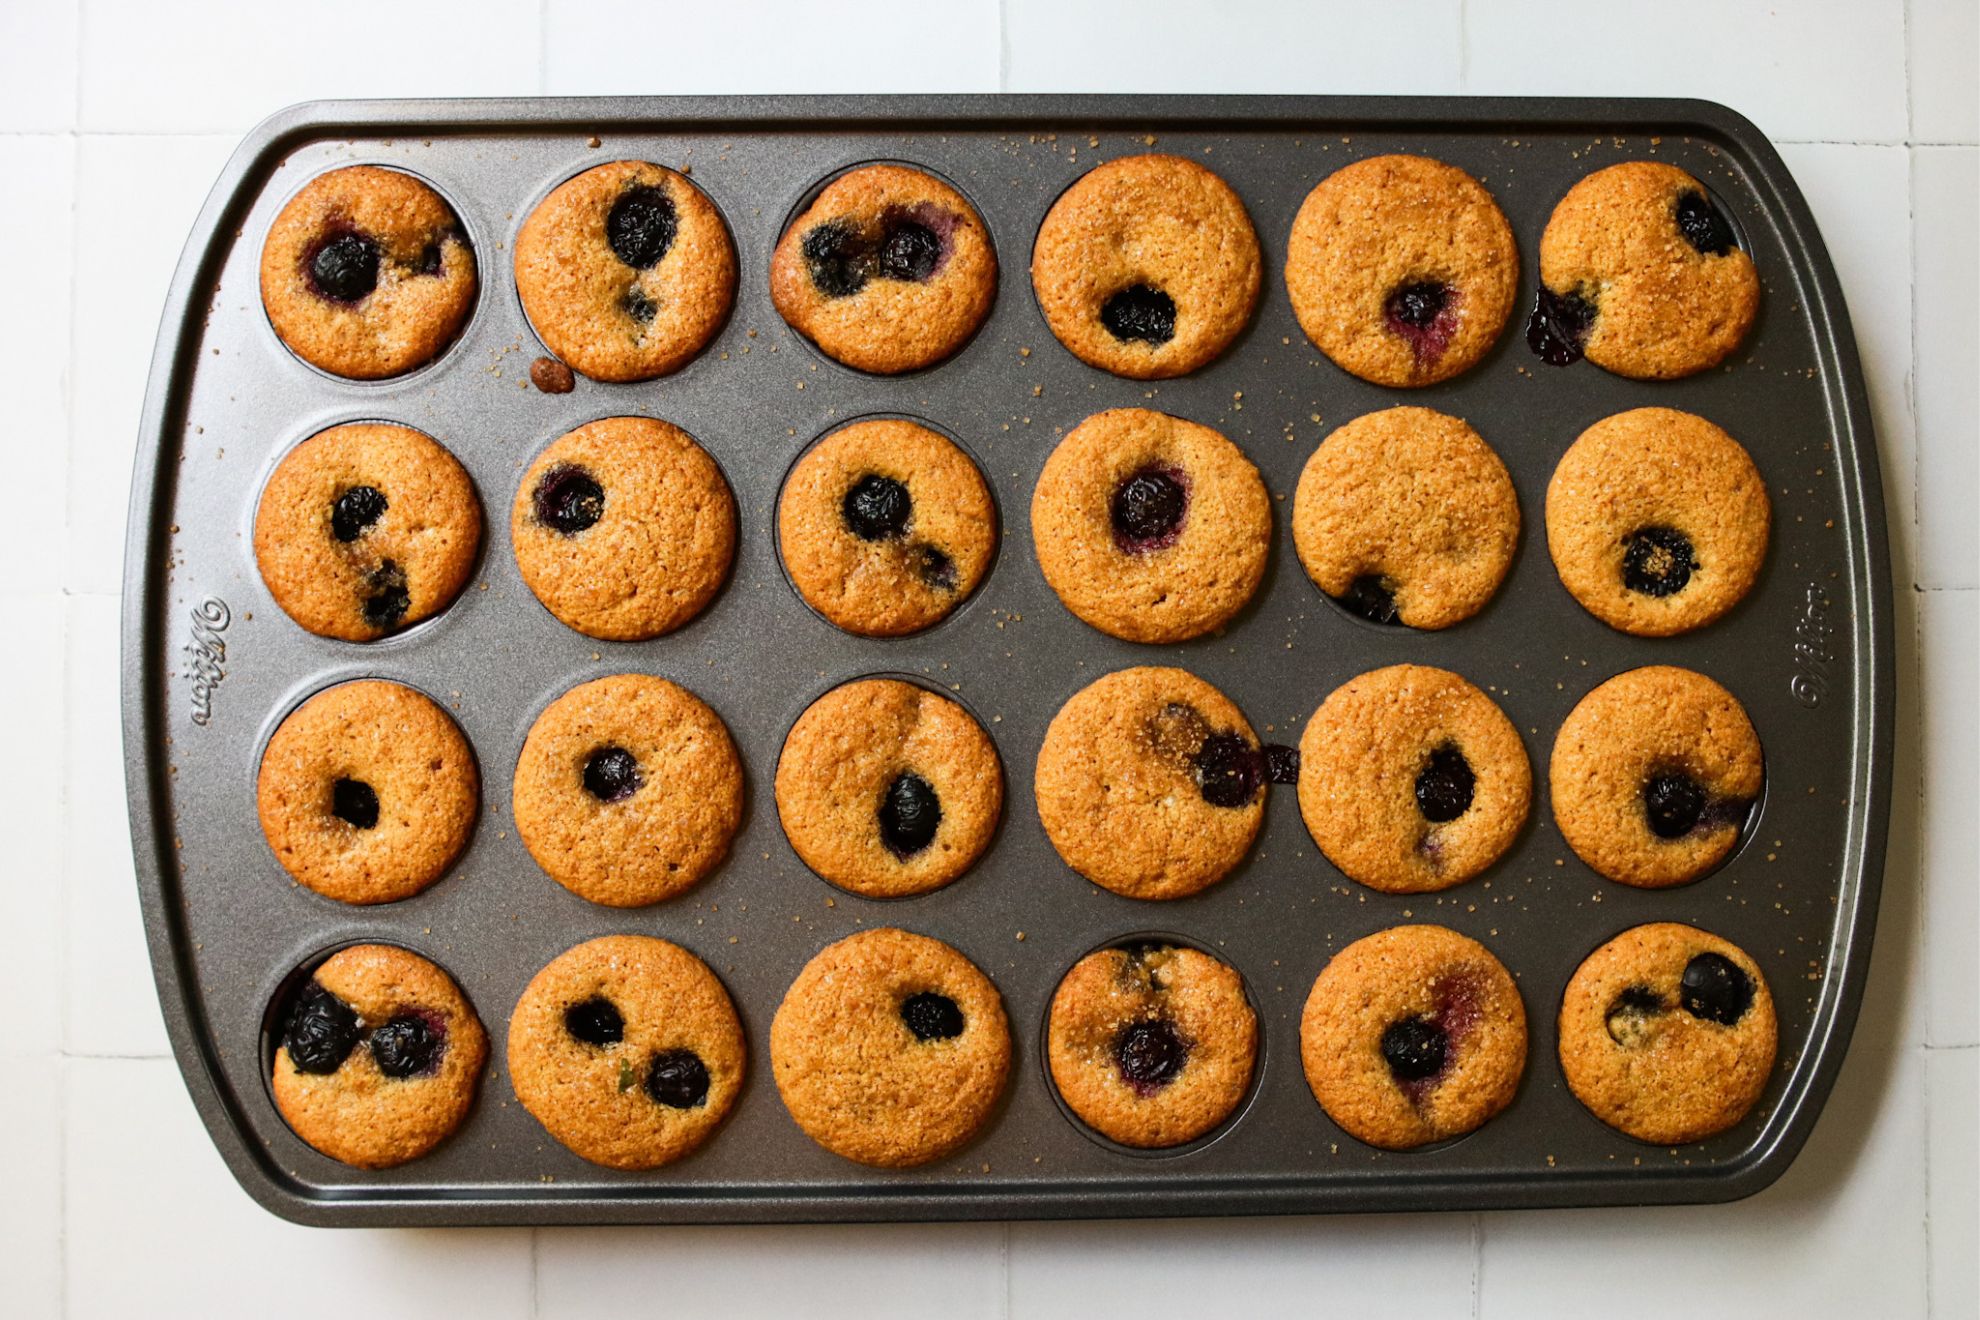 This is an overhead horizontal image of a 24 cup mini muffin tin on a white tile surface. The tin has baked blueberries muffins in it.